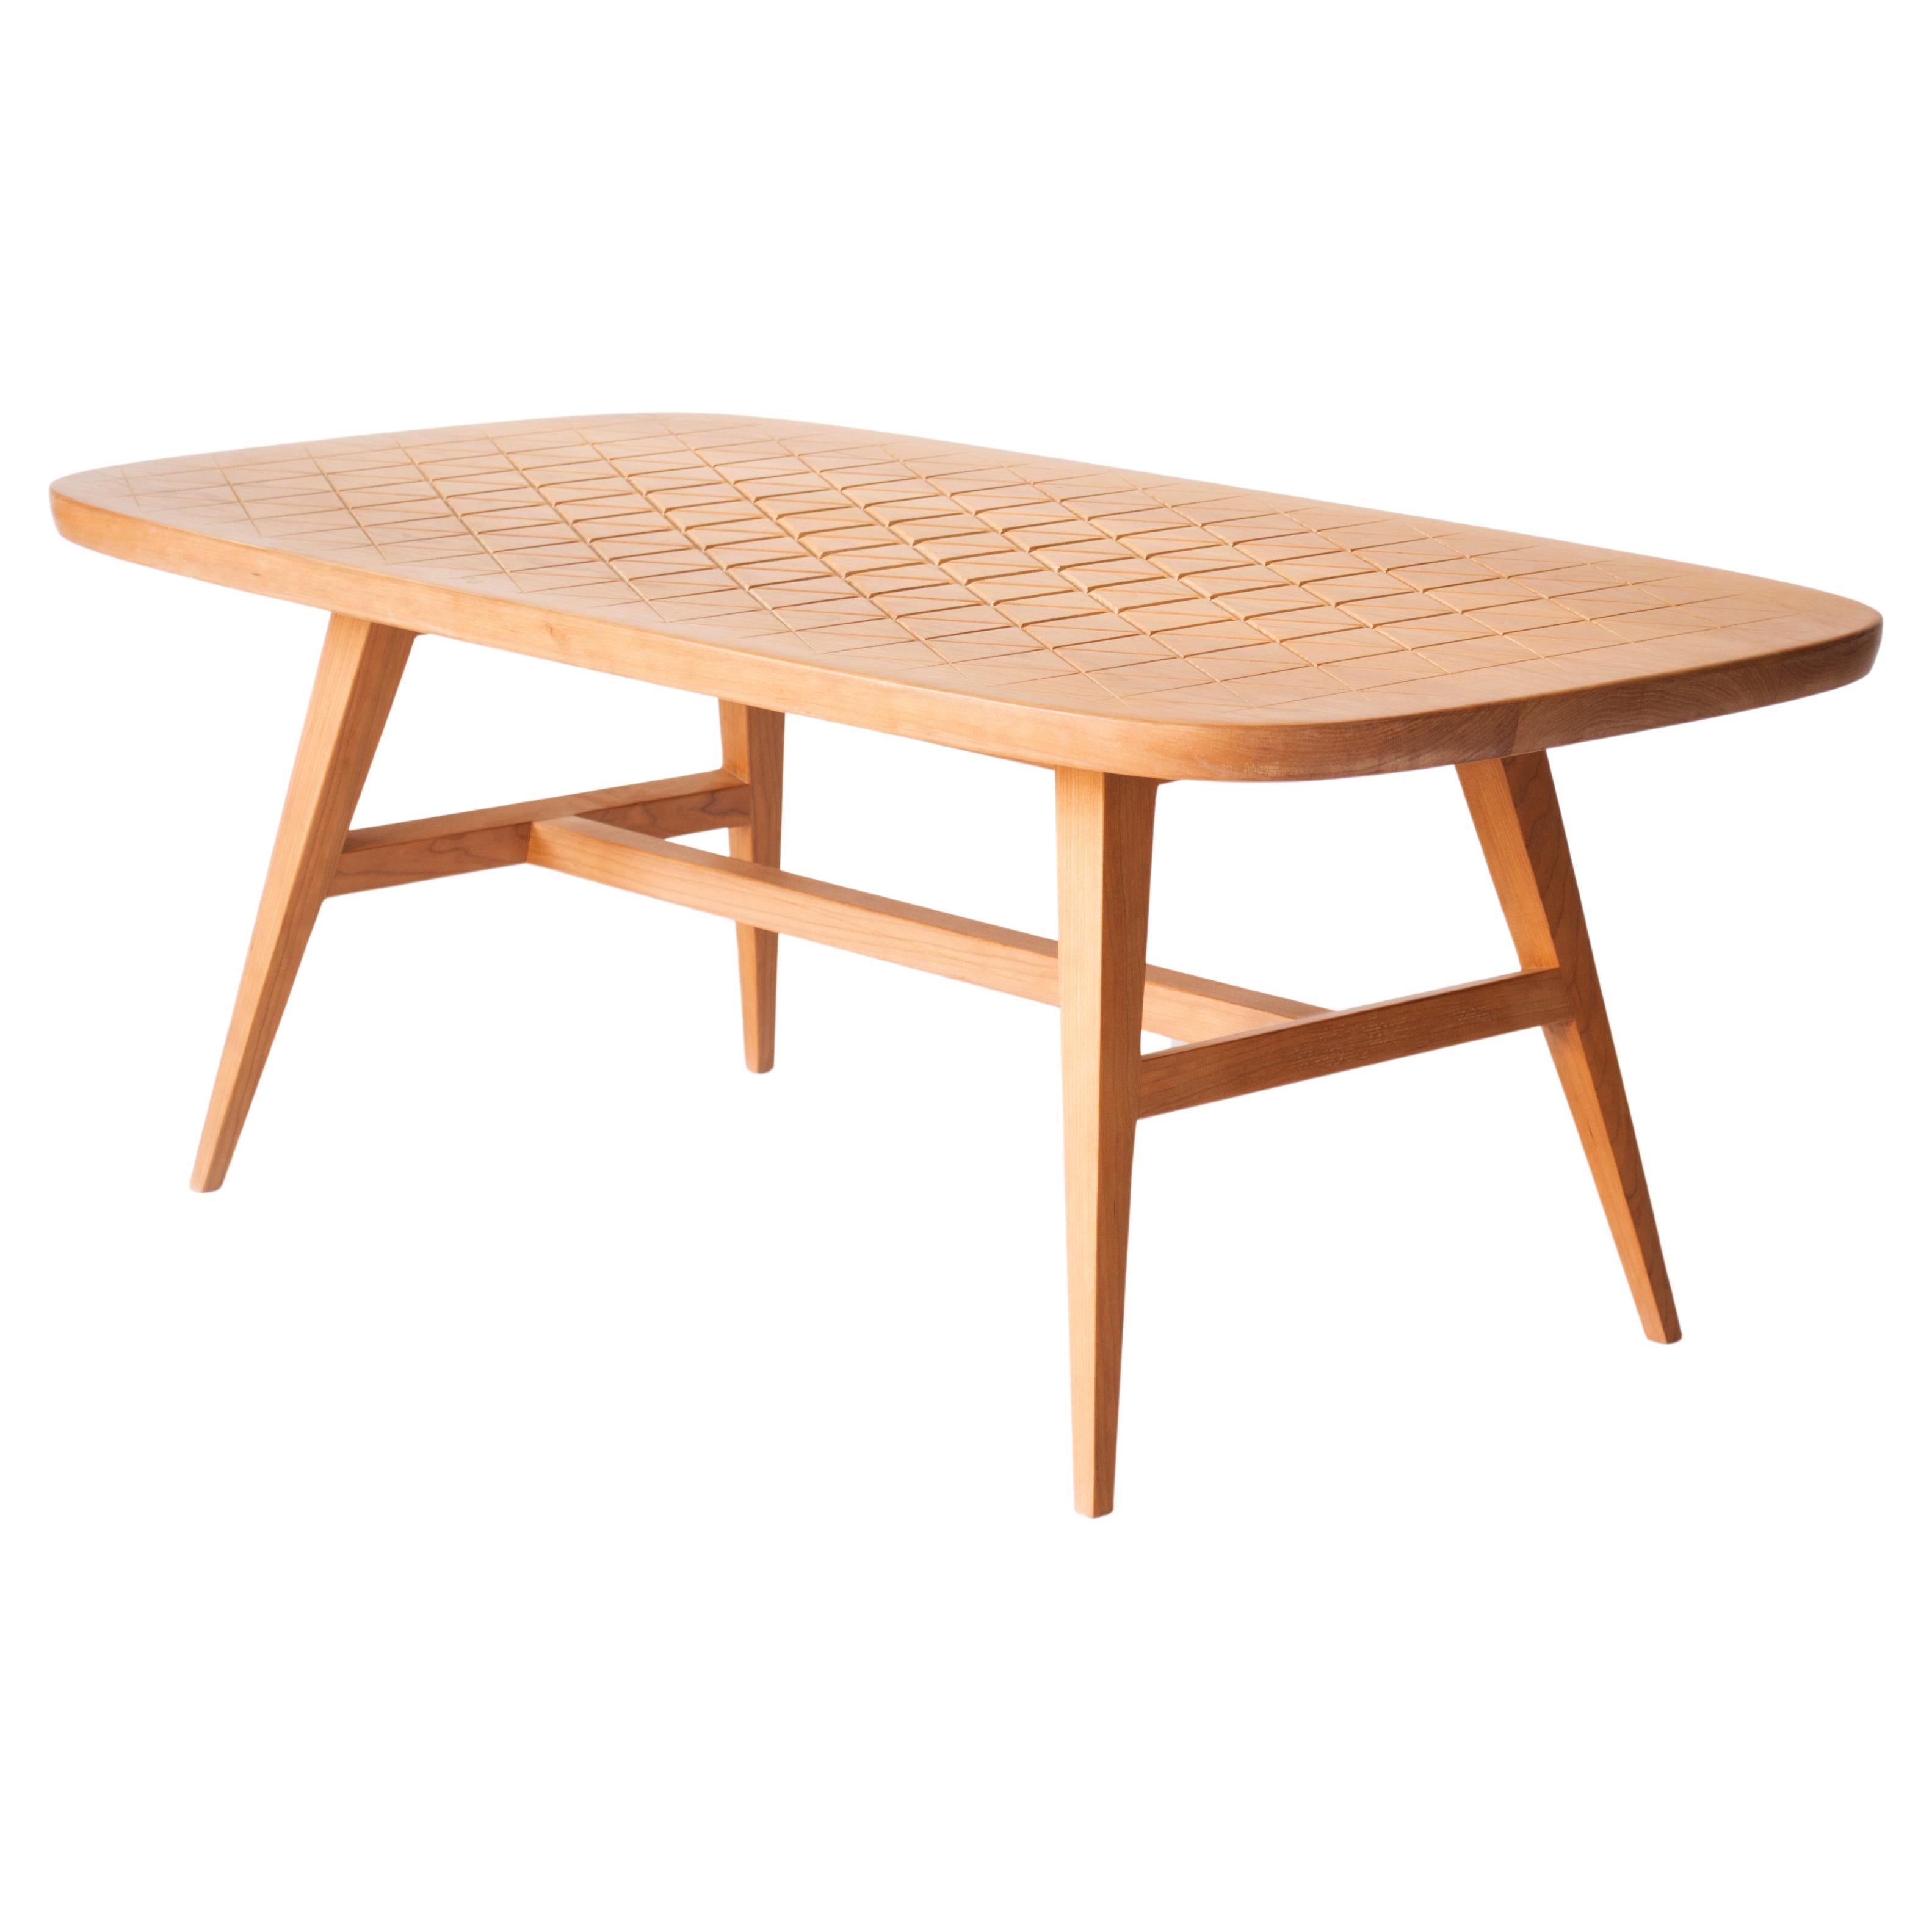 Palmetto Coffee Table in solid cherry by KLN studio